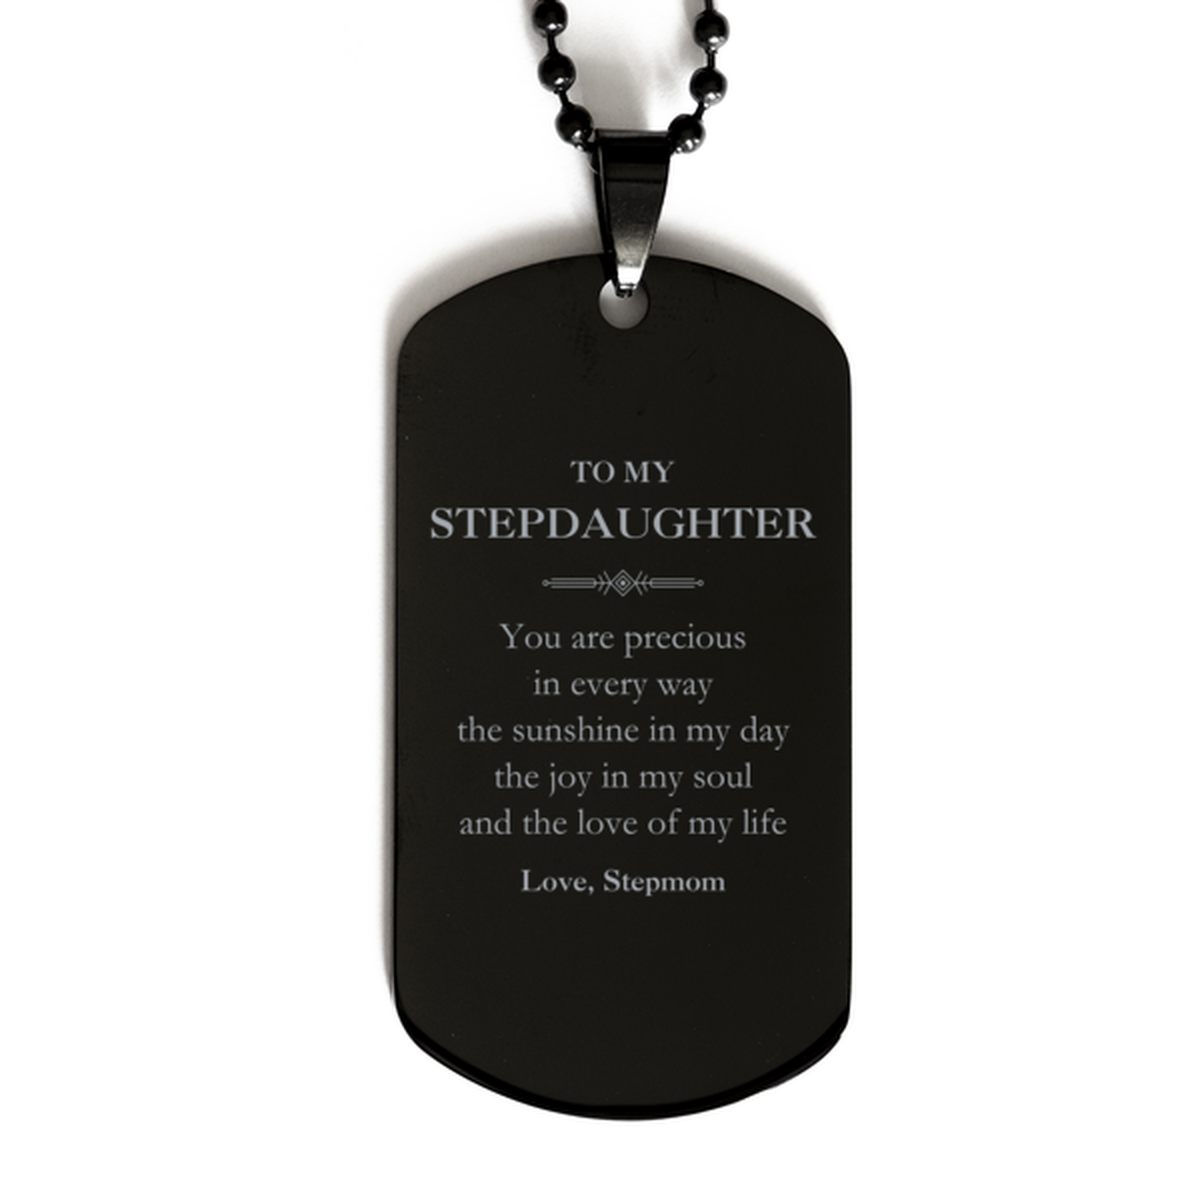 Graduation Gifts for Stepdaughter Black Dog Tag Present from Stepmom, Christmas Stepdaughter Birthday Gifts Stepdaughter You are precious in every way the sunshine in my day. Love, Stepmom